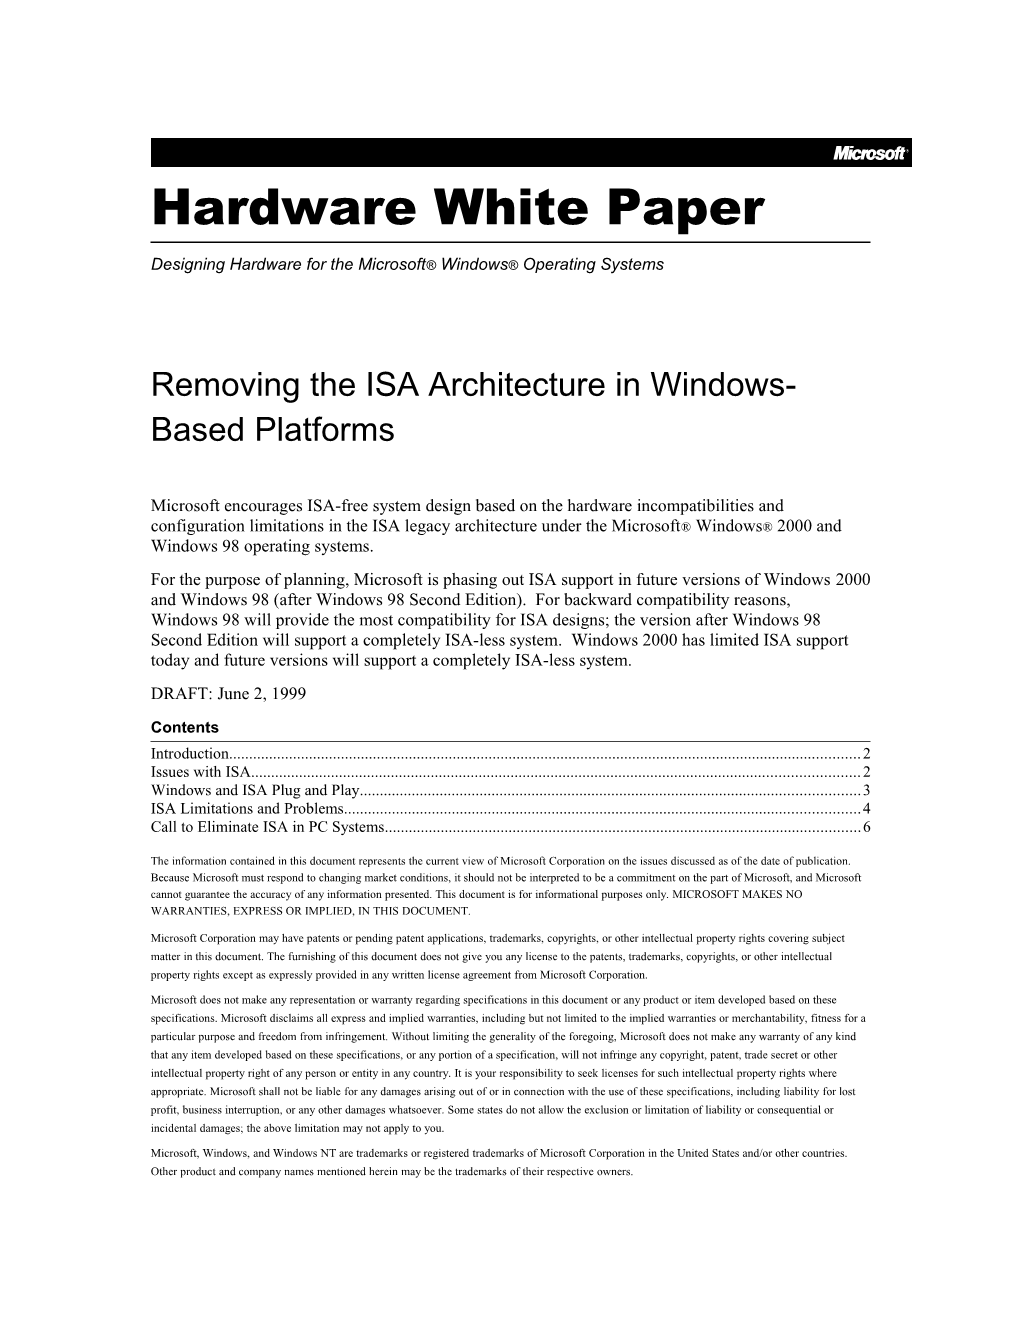 Removing the ISA Architecture in Windows-Based Platforms